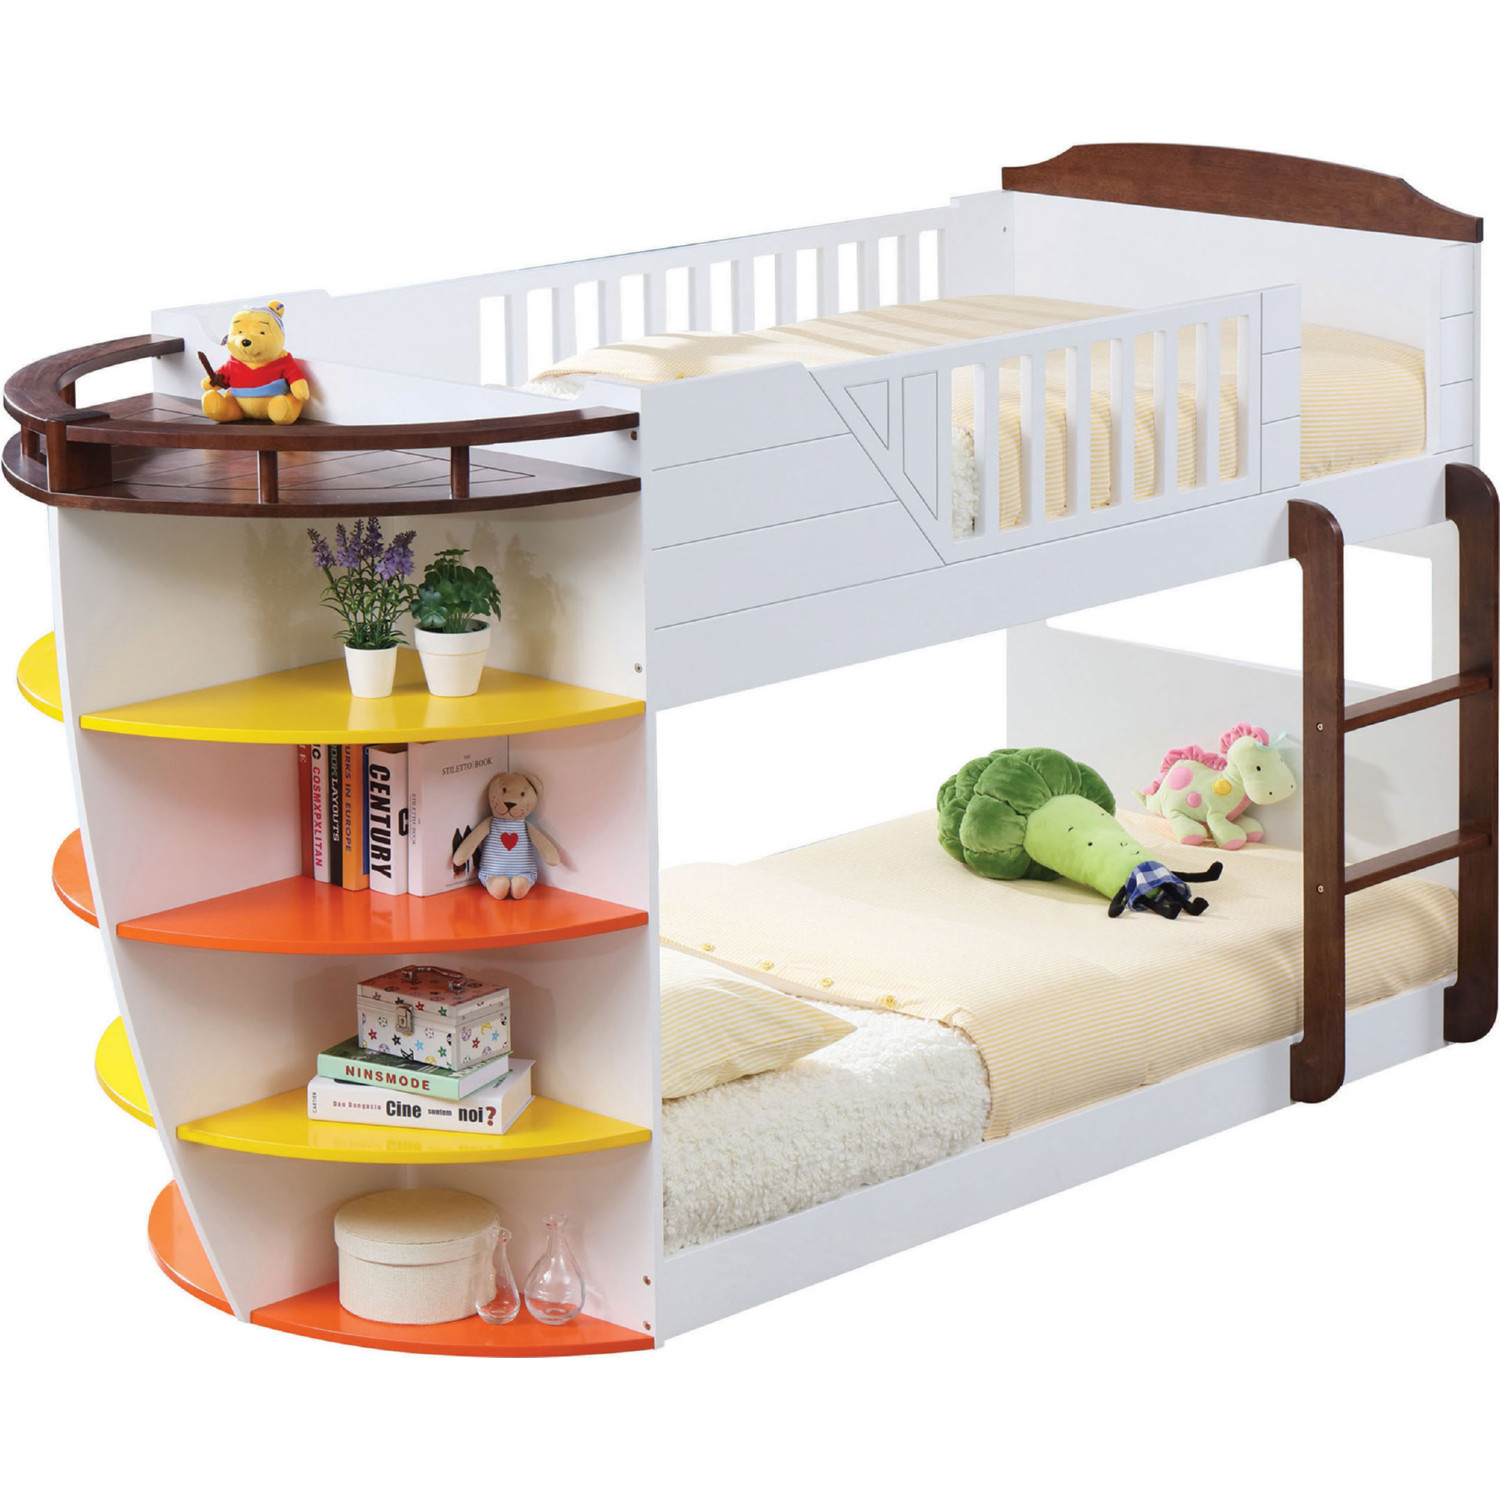 Twin Boat Bunk Bed, Boat Bunk Bed